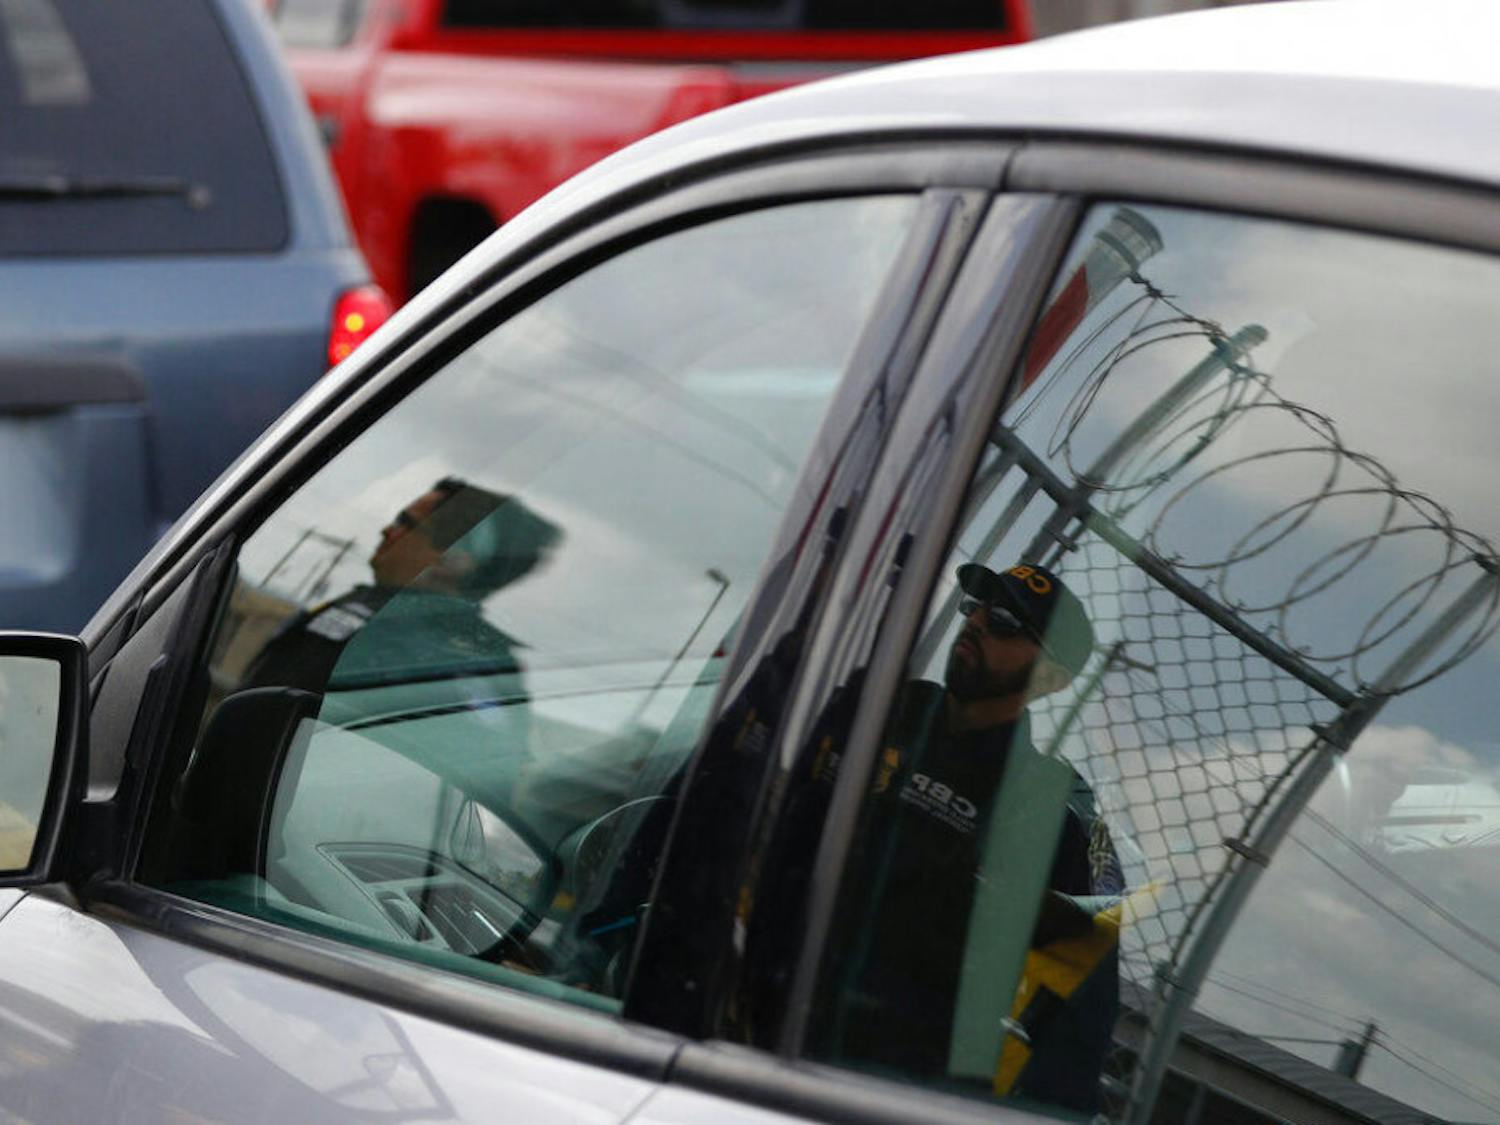 Customs and Border Protection agents are reflected in the window of an entering car, as they survey vehicles entering the U.S. on the Puerta Mexico international bridge leading into Brownsville, Texas from Matamoros, Mexico, Friday, June 28, 2019. Hundreds of migrants from Central America, South America, the Caribbean and Africa have been waiting for their number to be called at the bridge in downtown Matamoros, to have the opportunity to request asylum in the U.S.